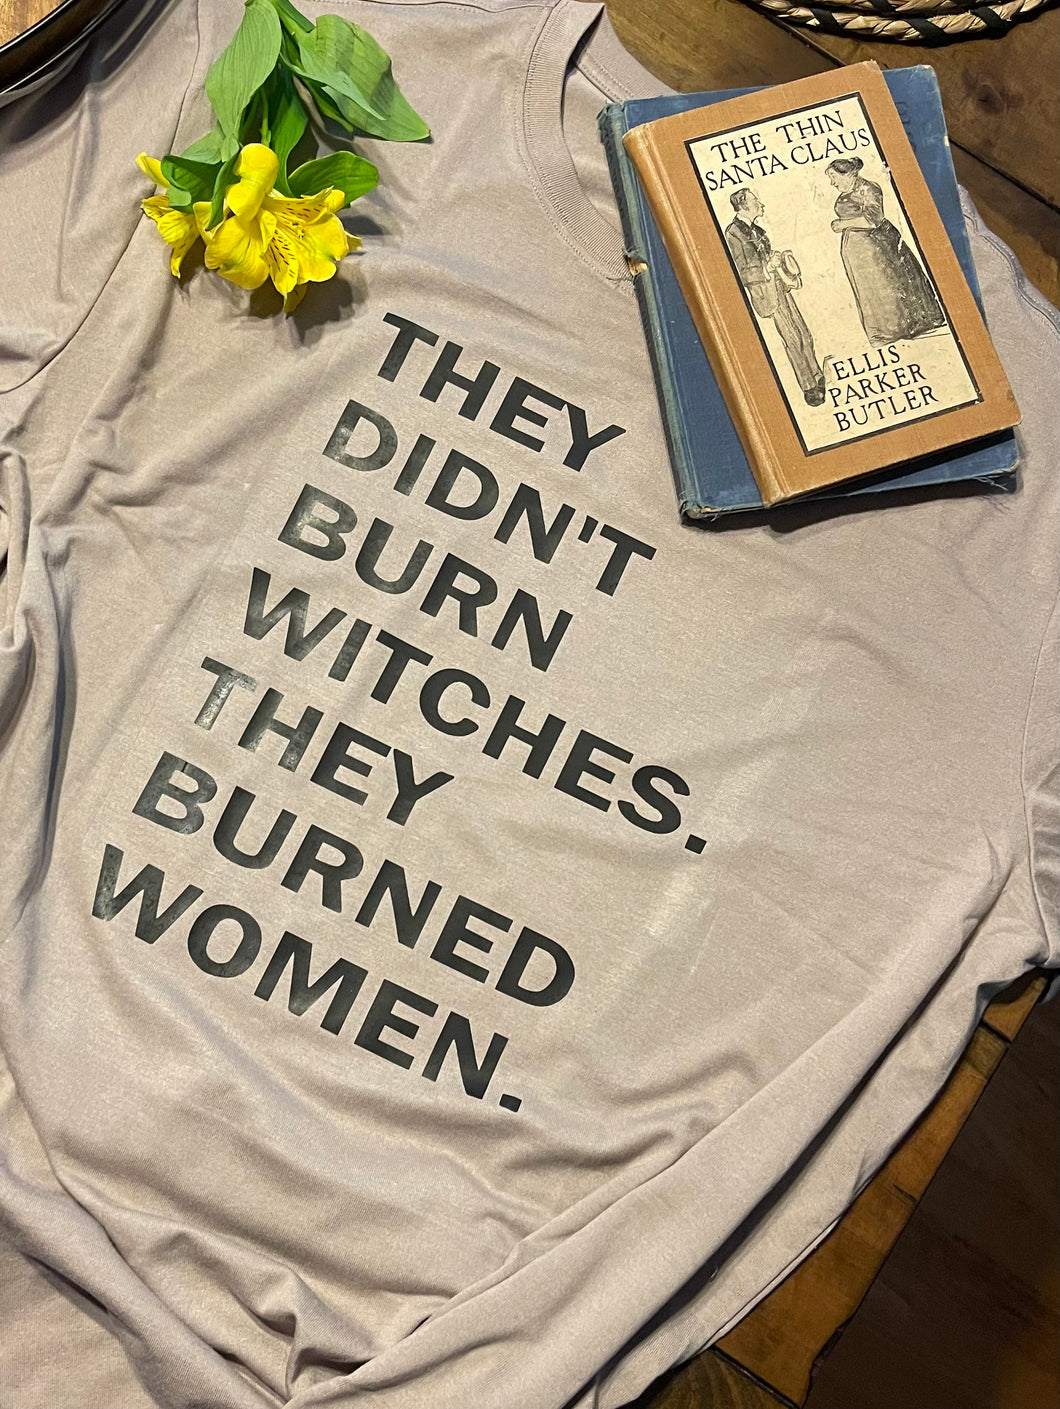 They Burned Women